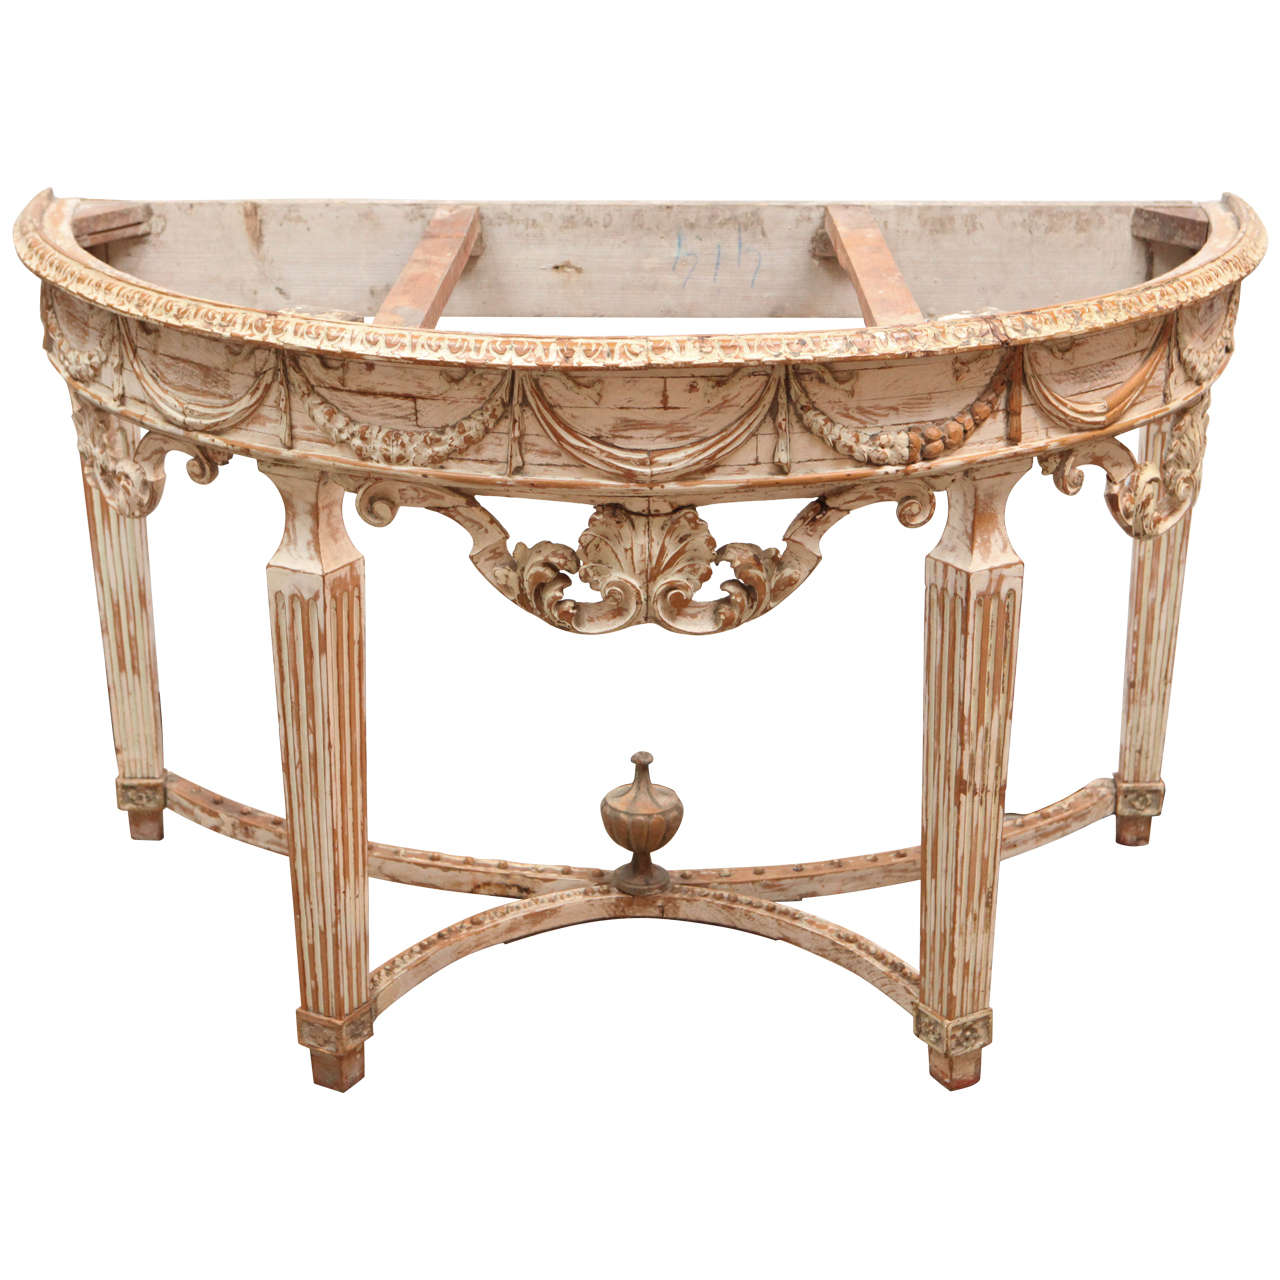 Early 19th century Italian carved demilune console table with stretcher and finely carved shell and garland motif. The siena marble top is original. It was originally gilded and now hardwood and gesso remains with a waxed finish.